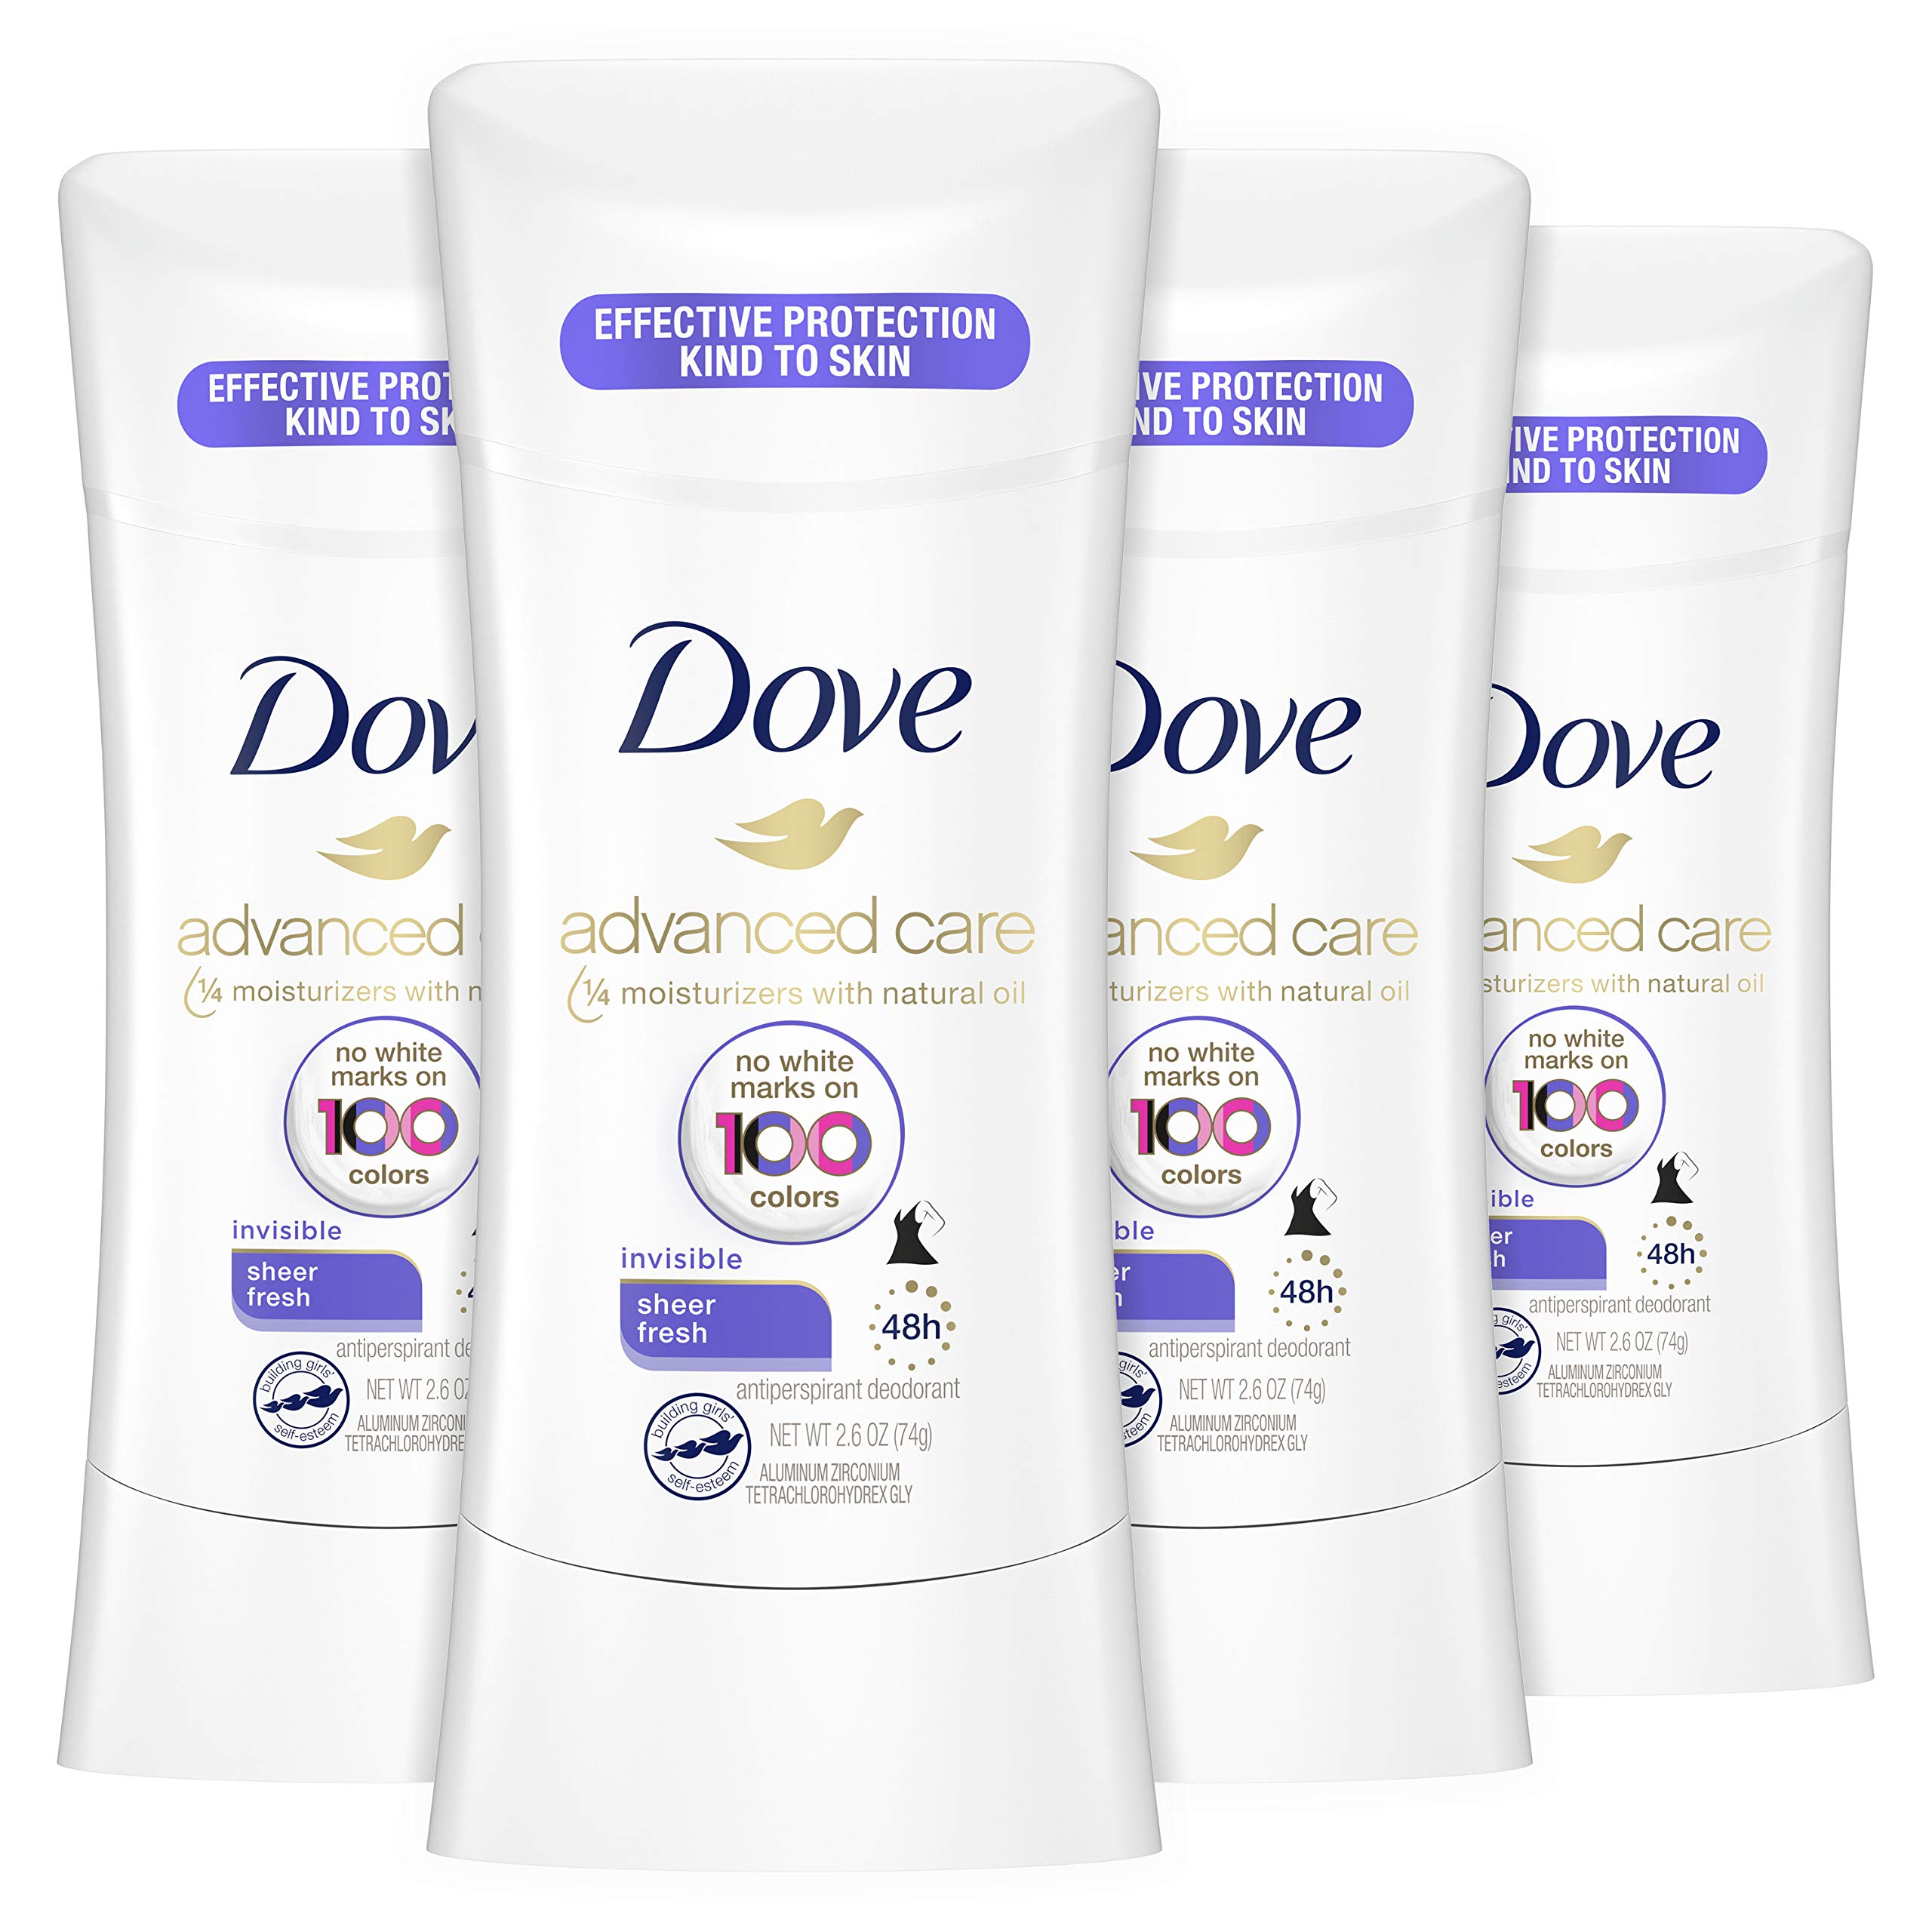 Dove Antiperspirant Deodorant Stick No White Marks on 100 Colors Sheer Fresh 48Hour Sweat and Odor Protecting Deodorant for Women oz 4 Count, 2.6 Ounce